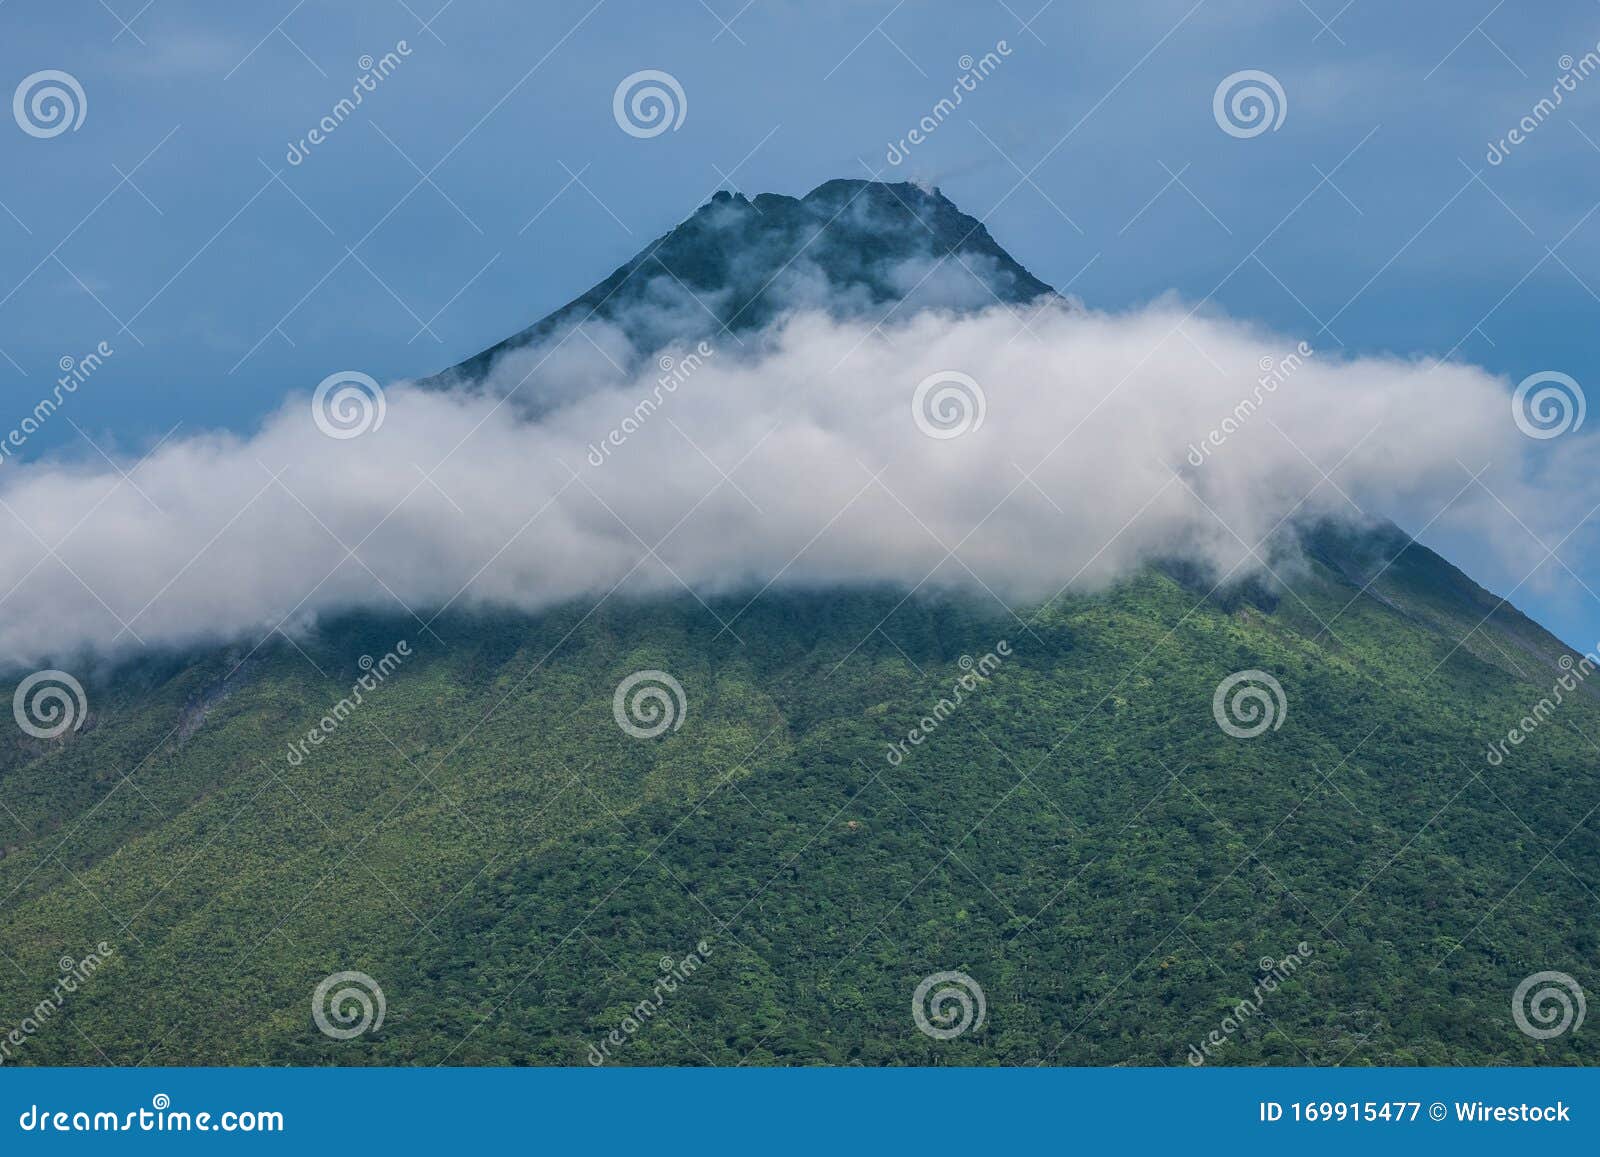 Mount Scenery Covered In Forests And Clouds Under A Blue Sky In The Caribbean Netherlands Stock Image Image Of Background Cornwall